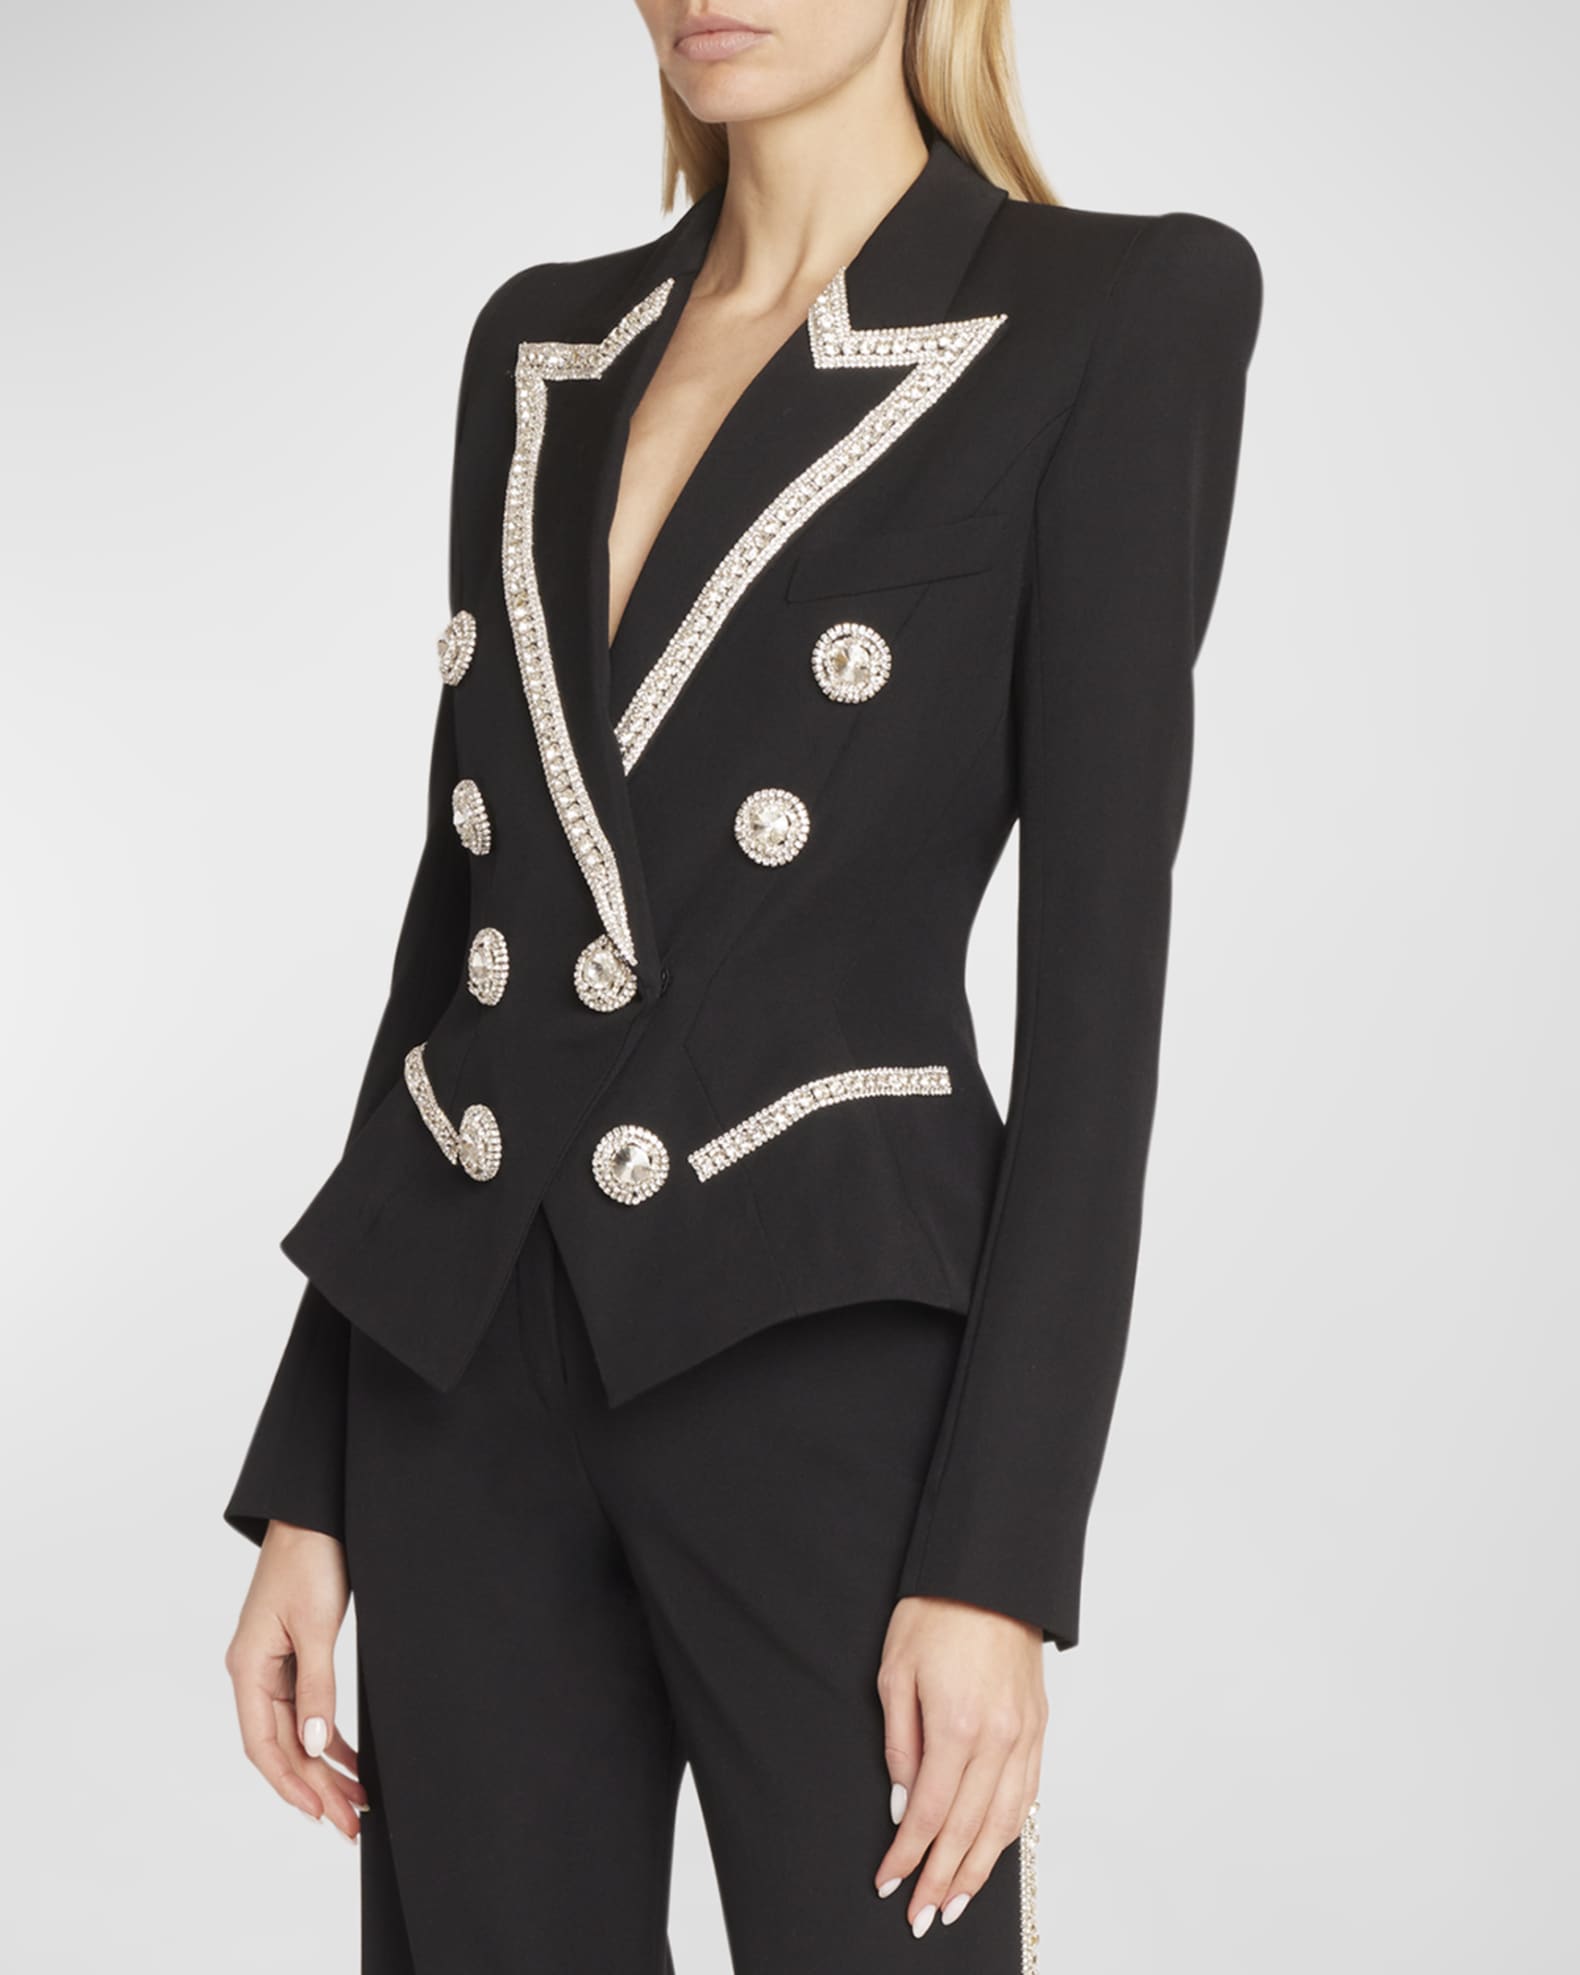 Balmain Embroidered 8-Button Double-breasted Jacket Neiman Marcus